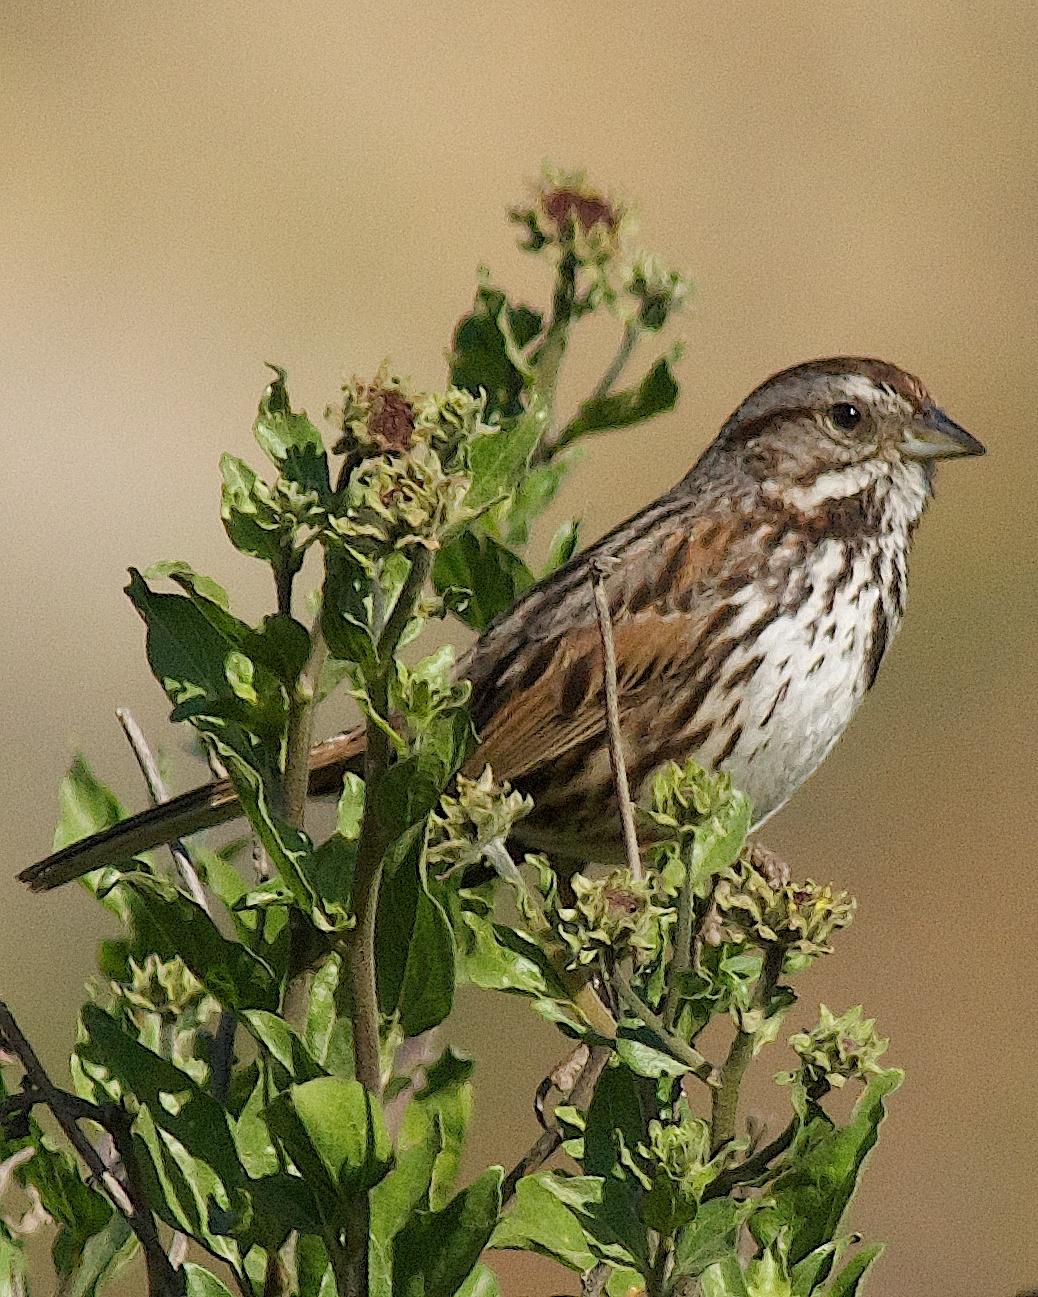 Song Sparrow Photo by Gerald Hoekstra